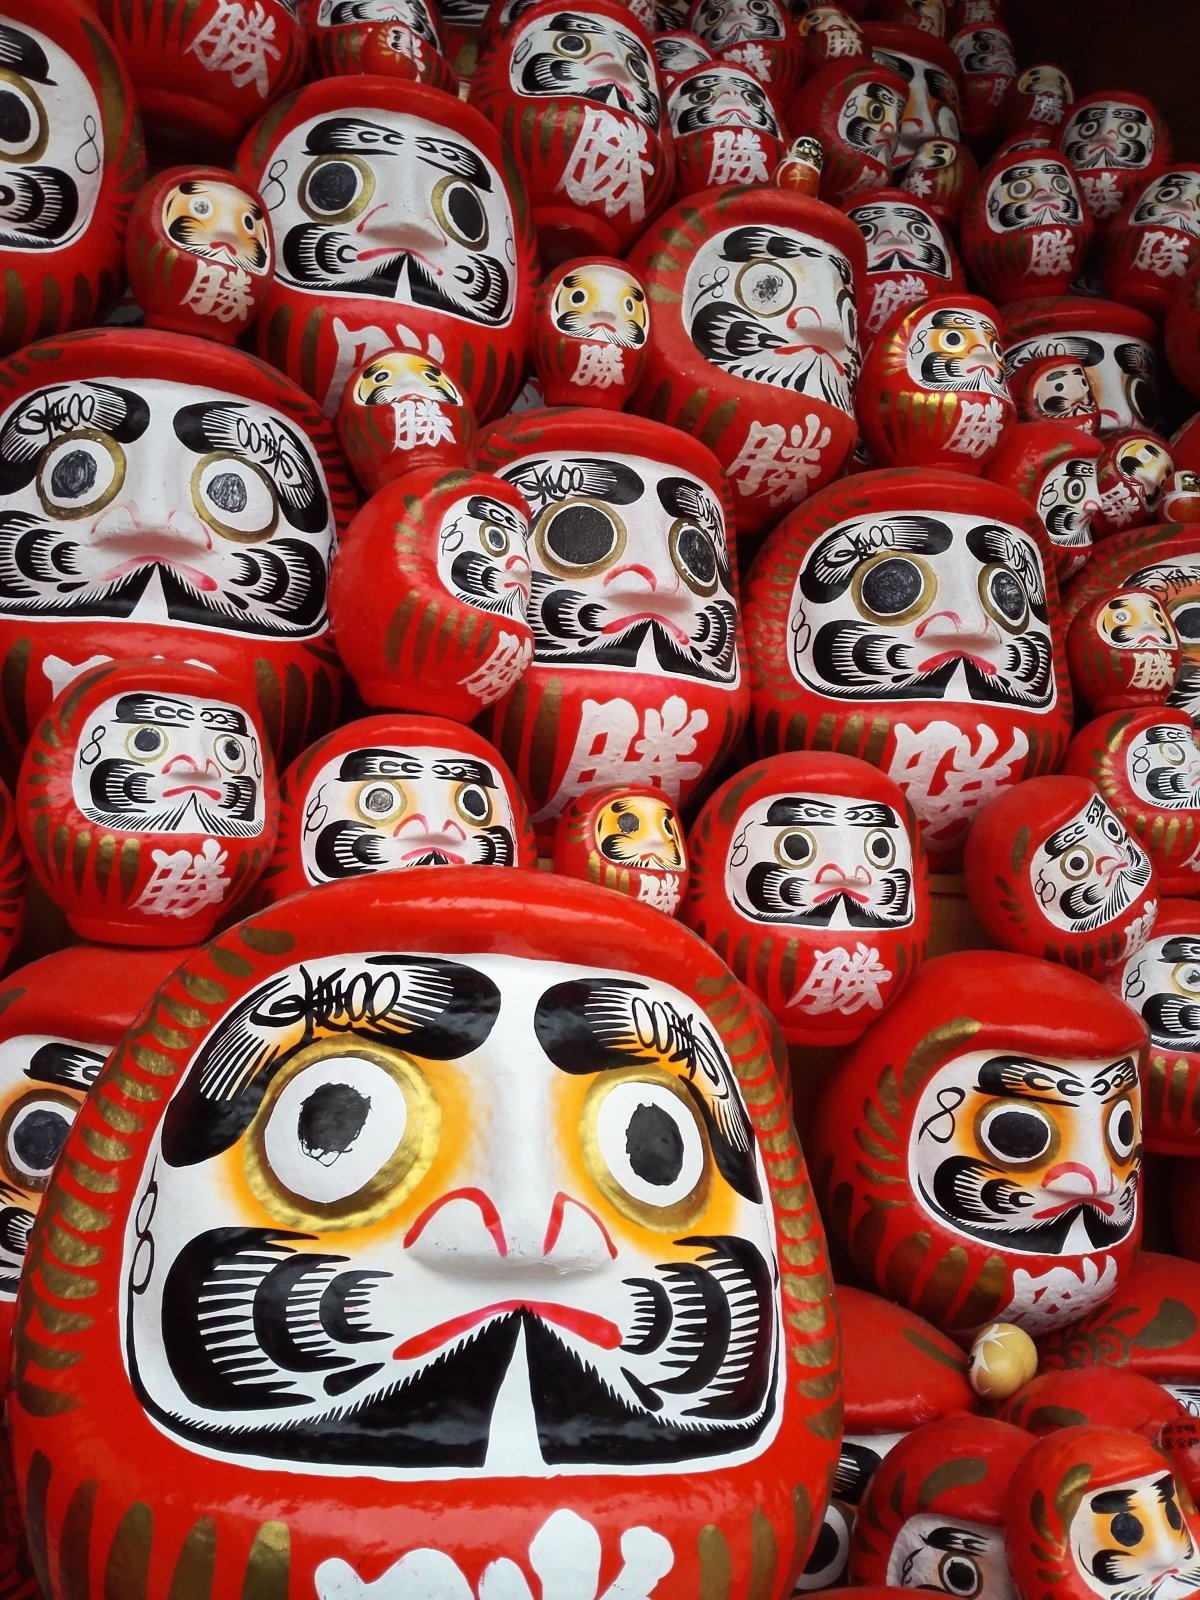 Daruma Dolls from Japan or from the purposes, InfoMistico.com